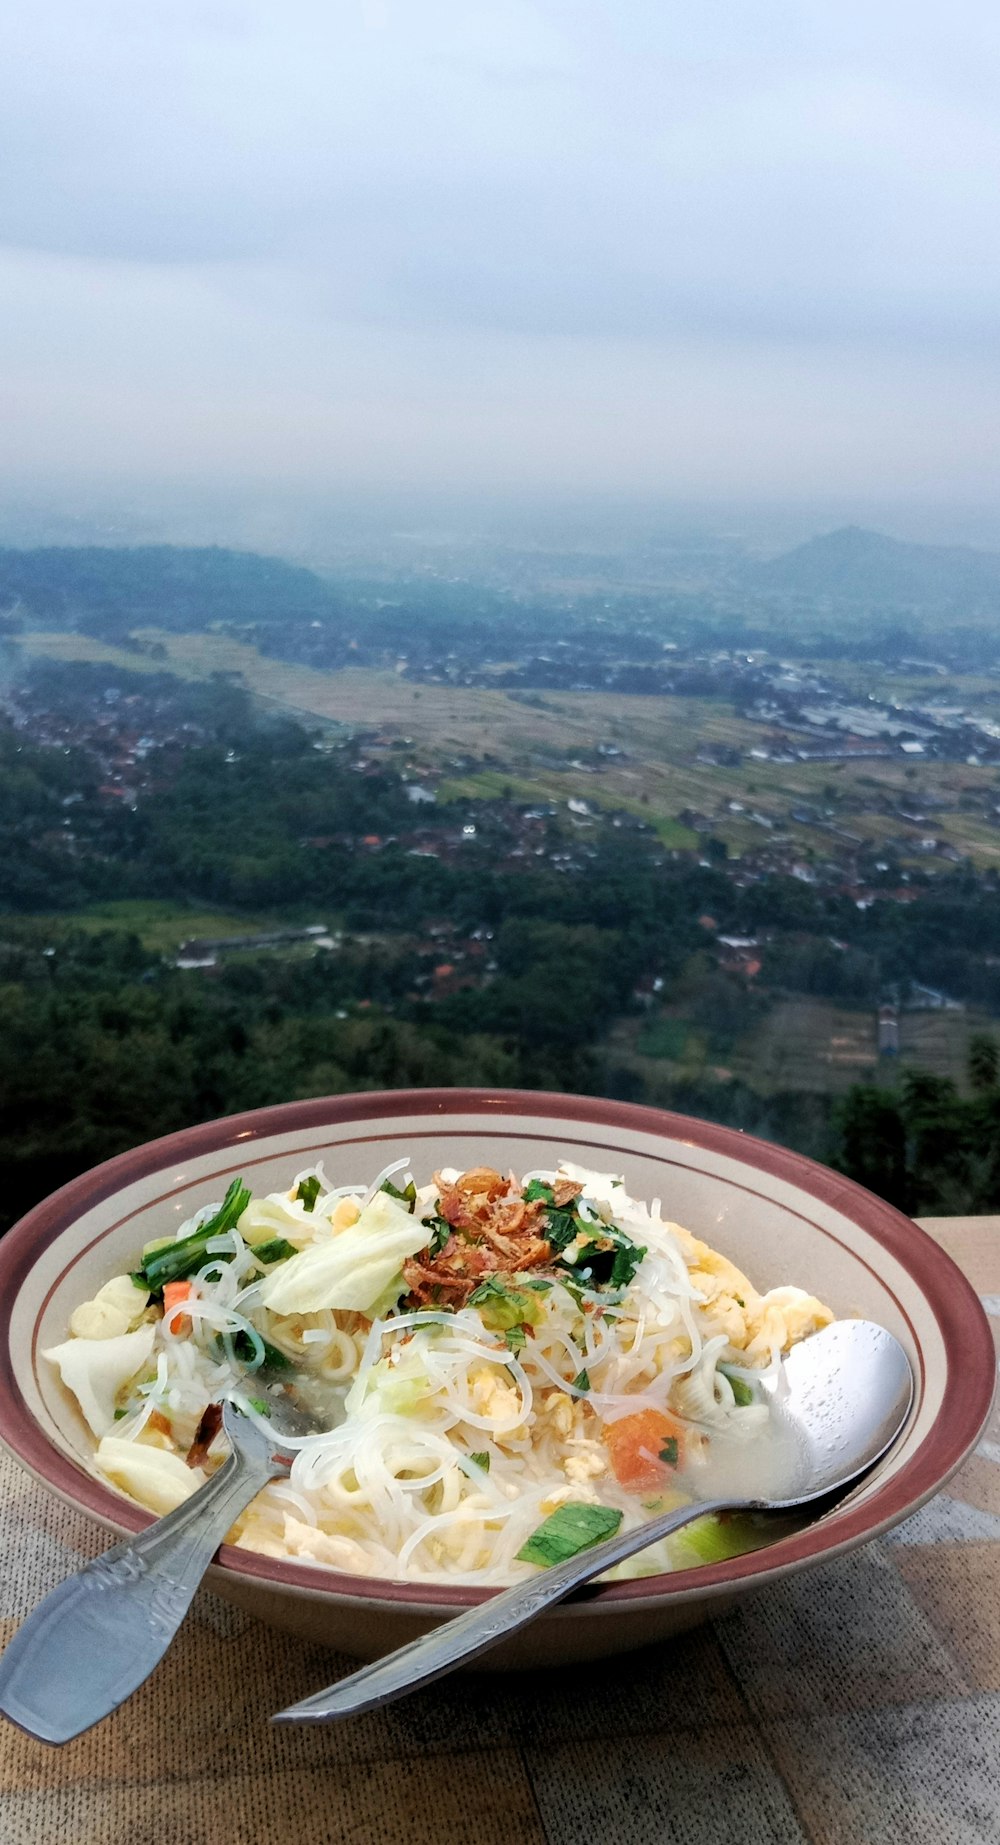 a bowl of food on a table with a view of a valley